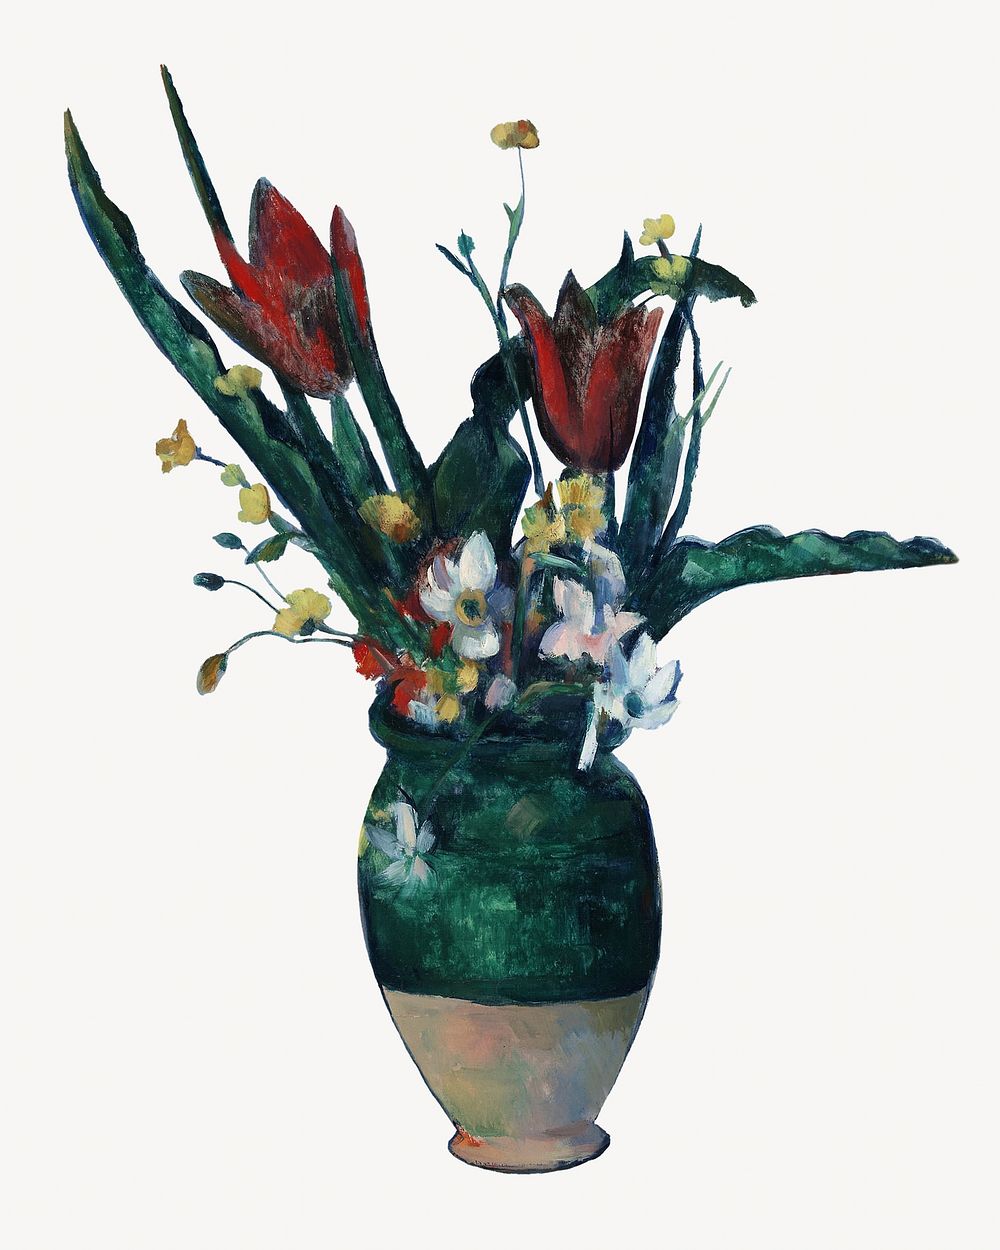 Paul Cezanne&rsquo;s Vase of Tulips, still life painting.  Remixed by rawpixel.